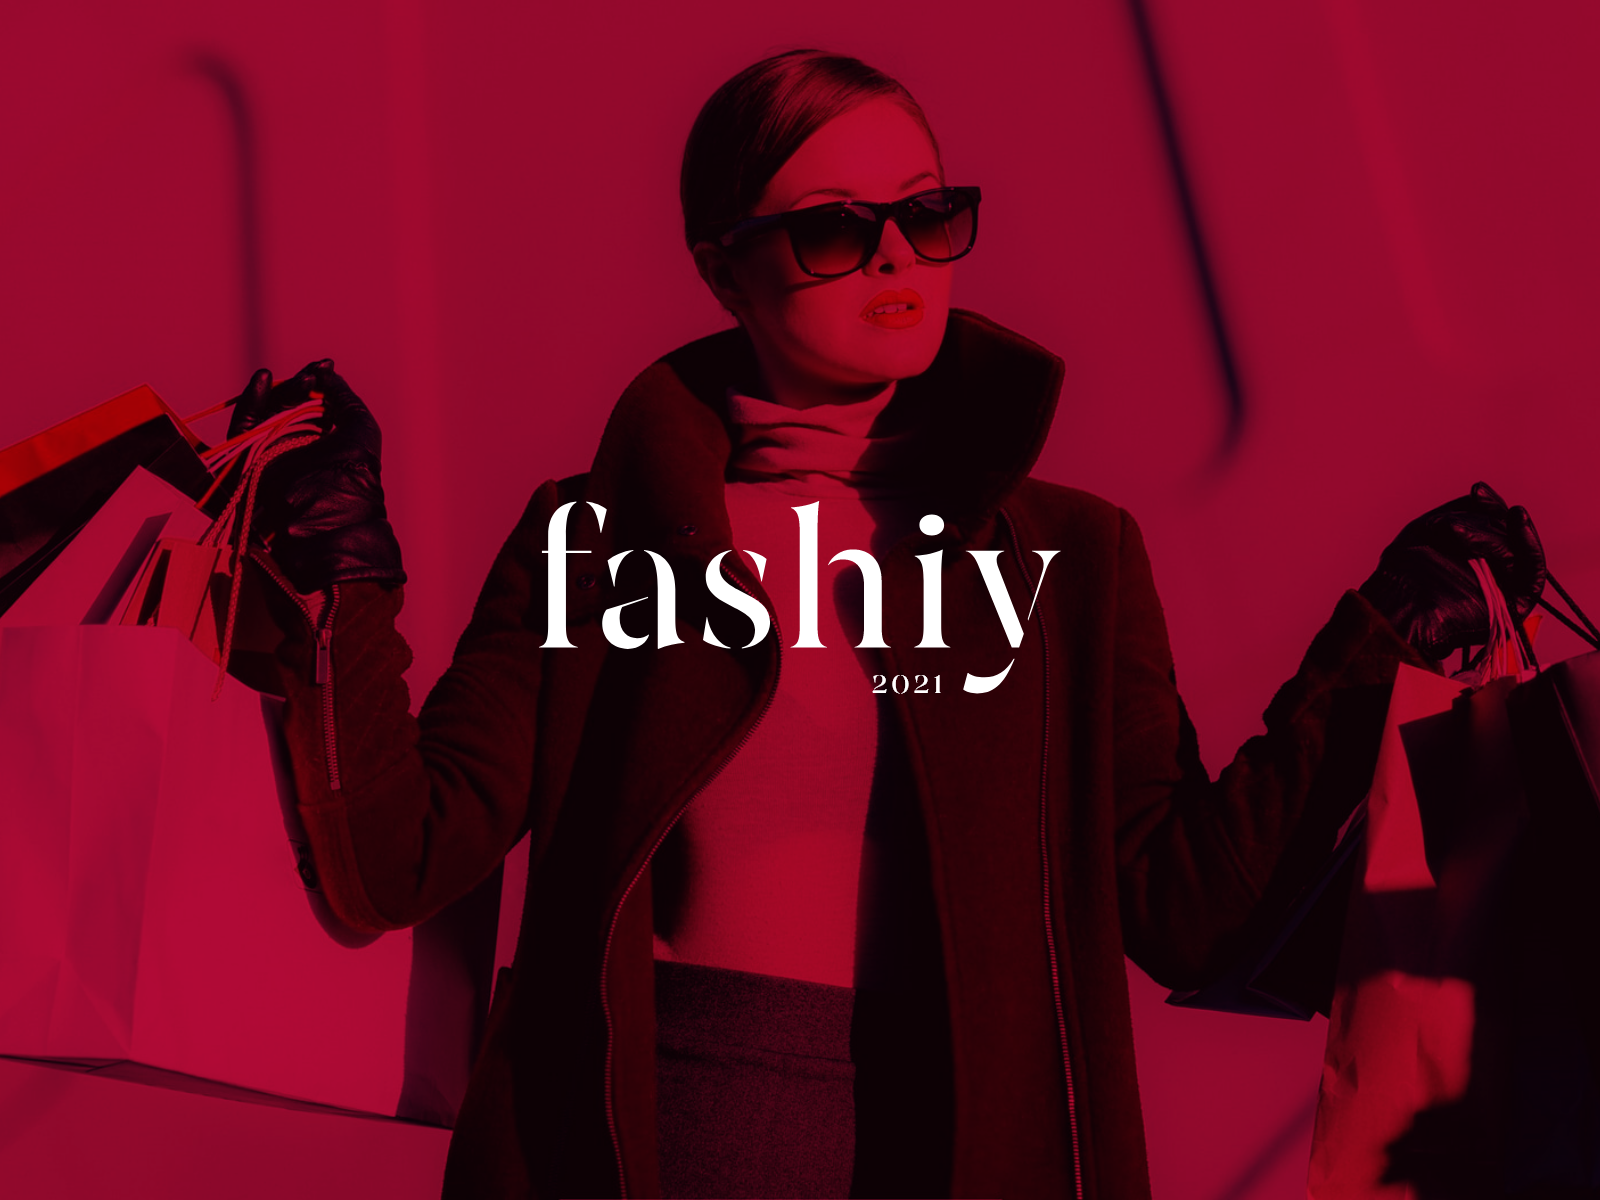 Fashivy Brand Identity Concept Design by Zahid on Dribbble